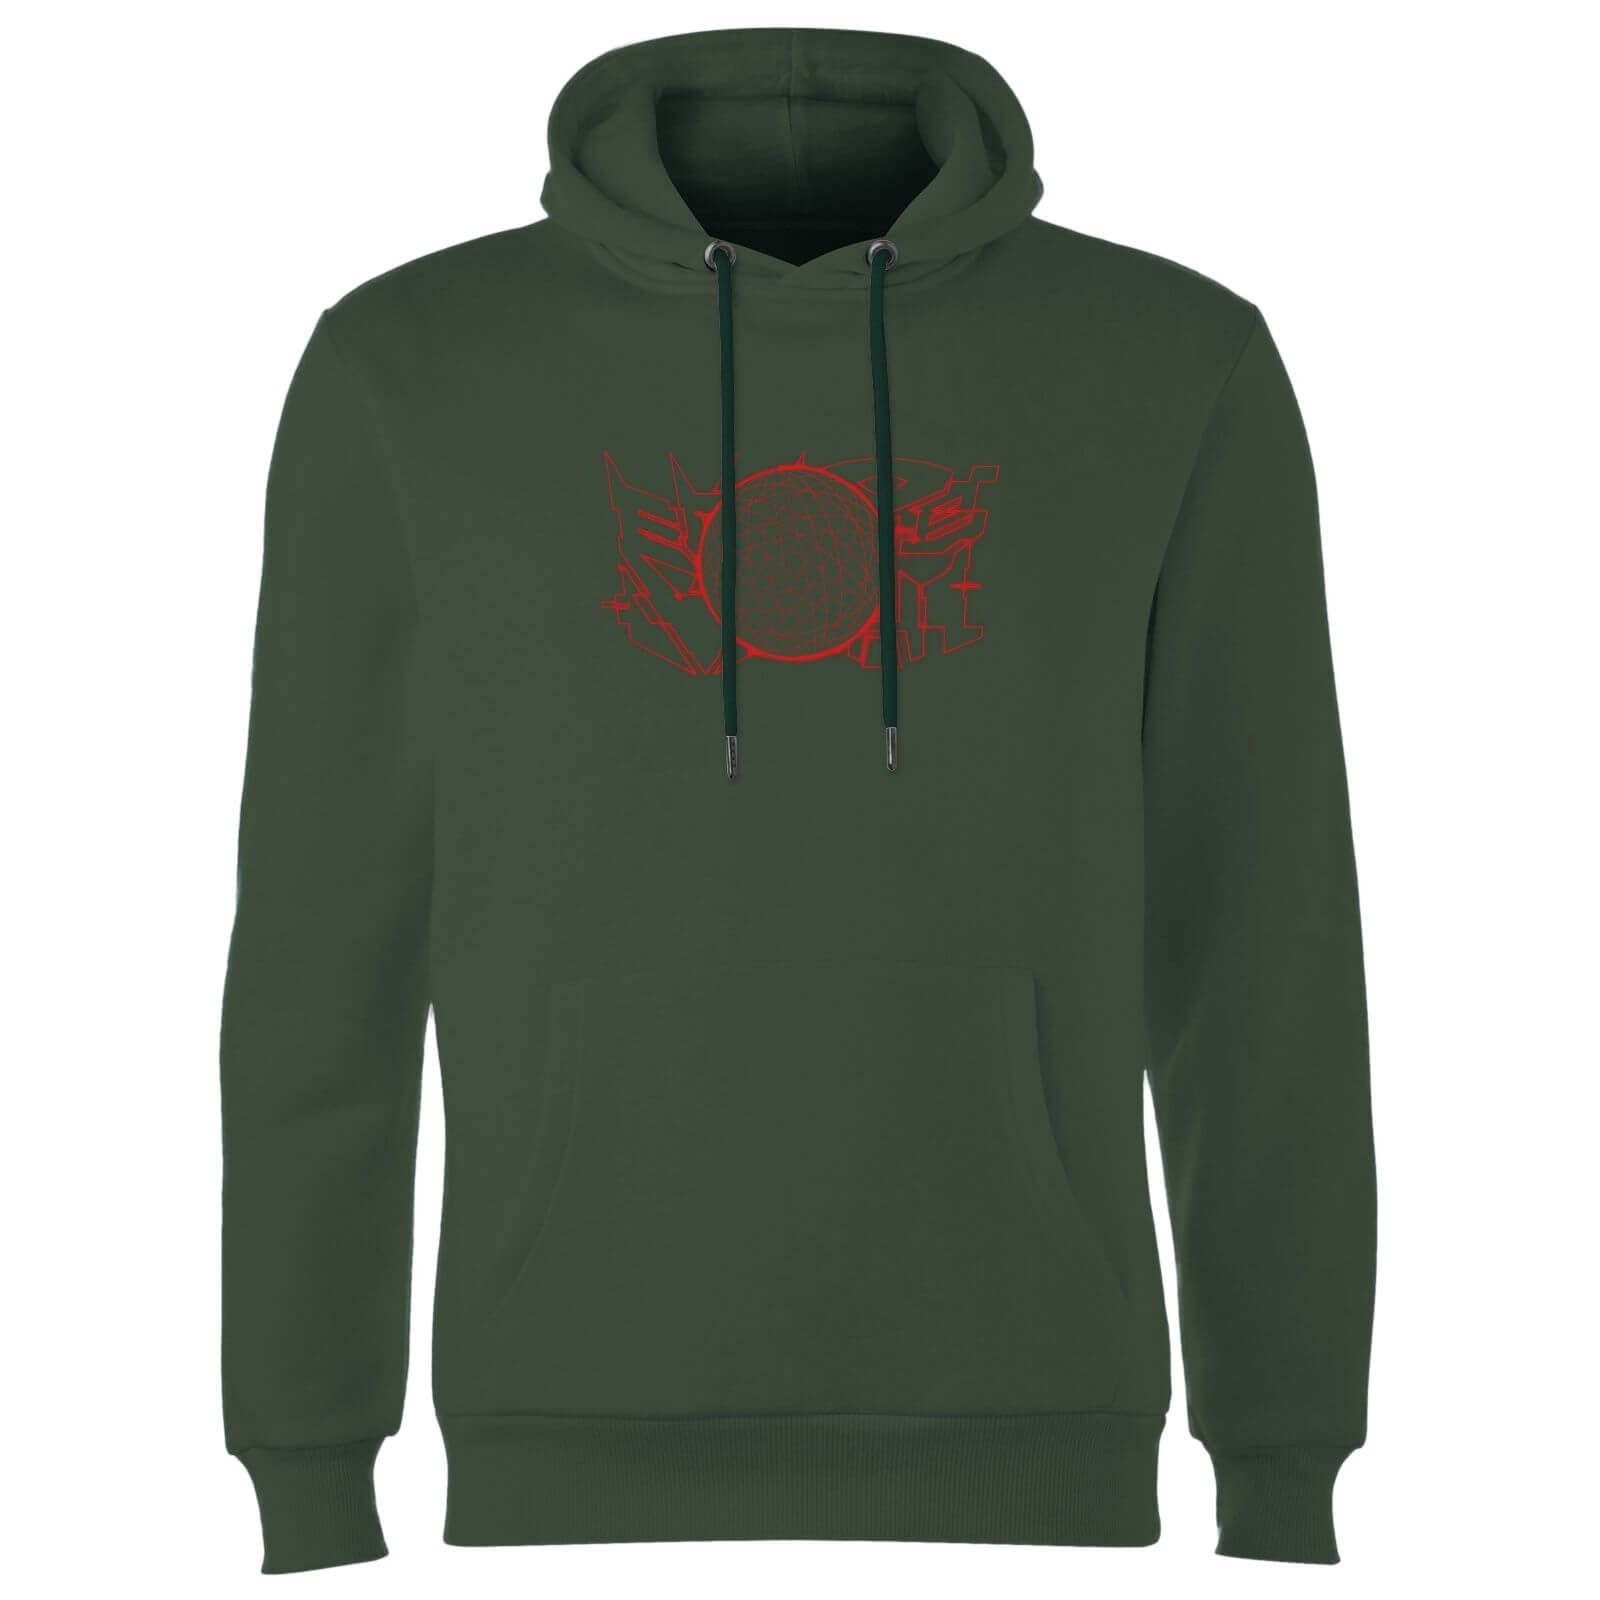 Transformers War For Cybertron Hoodie - Forest Green - L - Forest Green